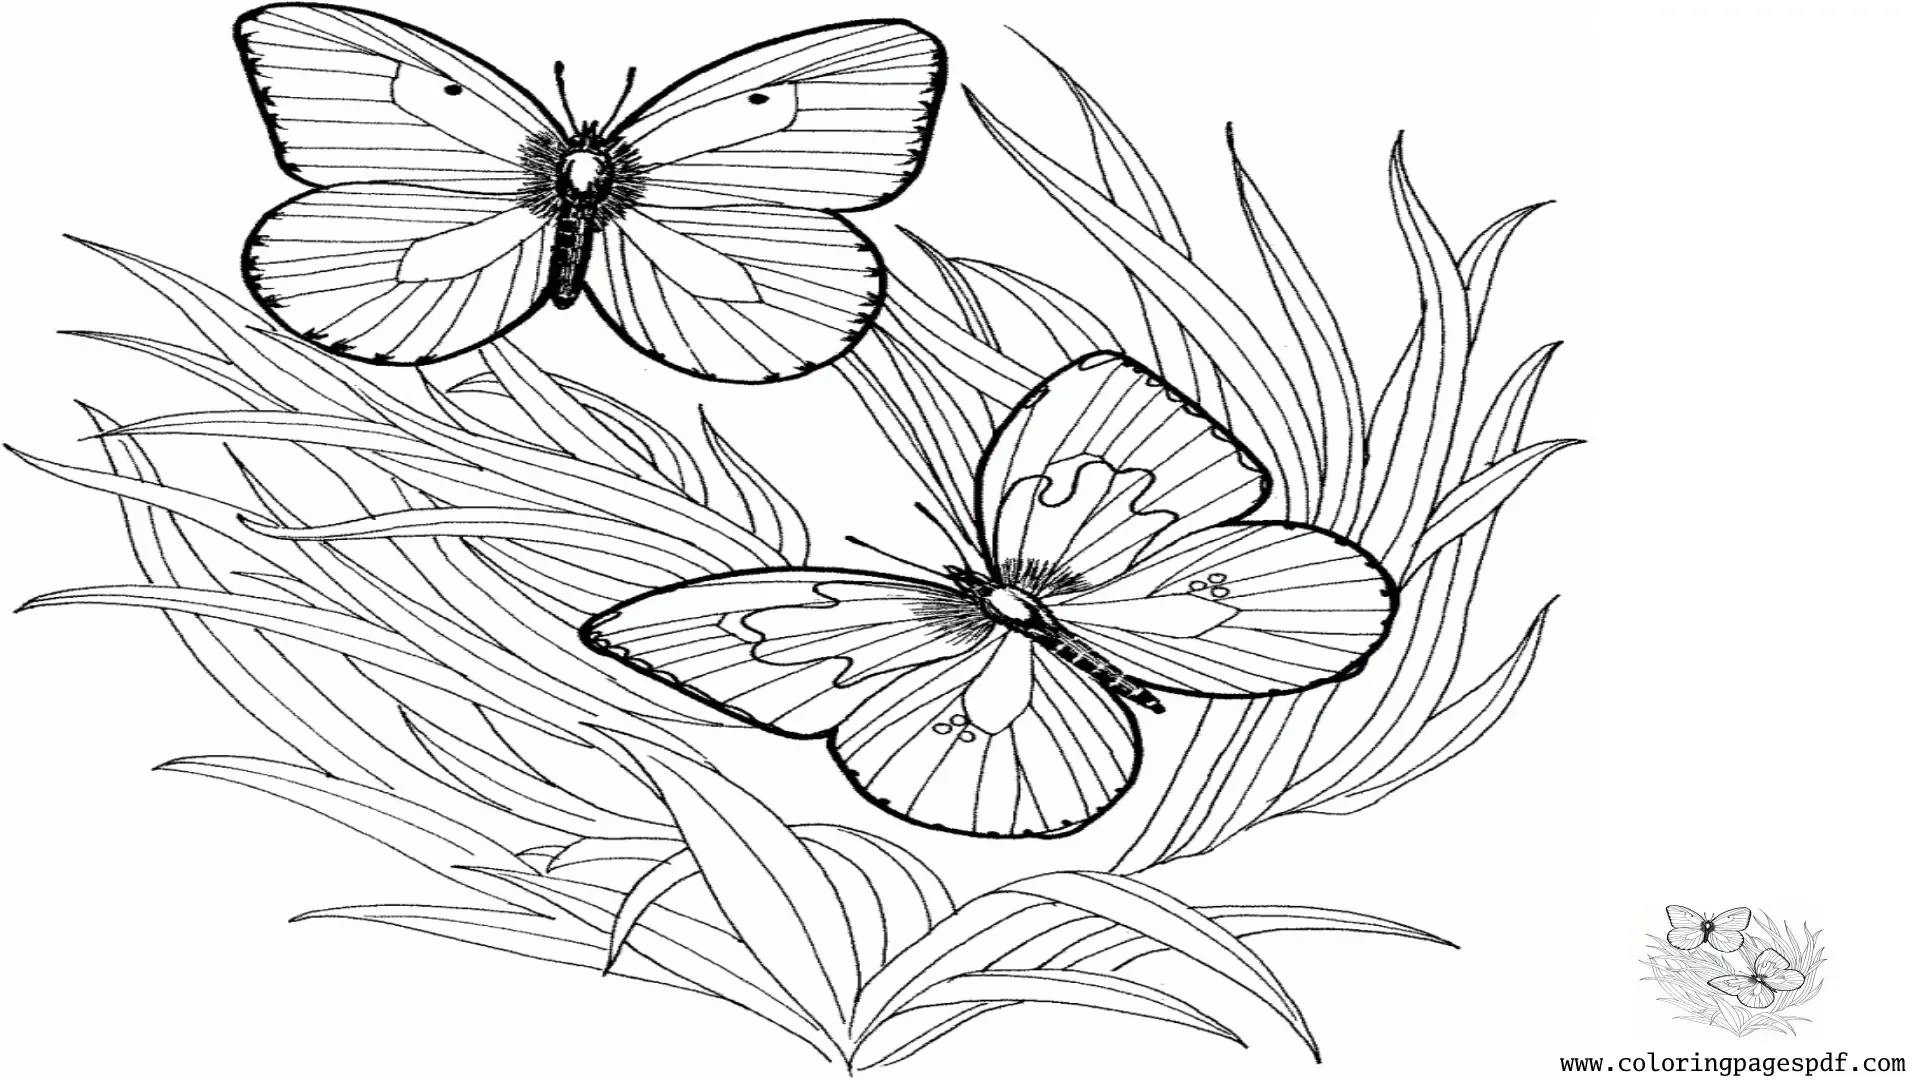 Coloring Page Of Two Butterflies With Grass